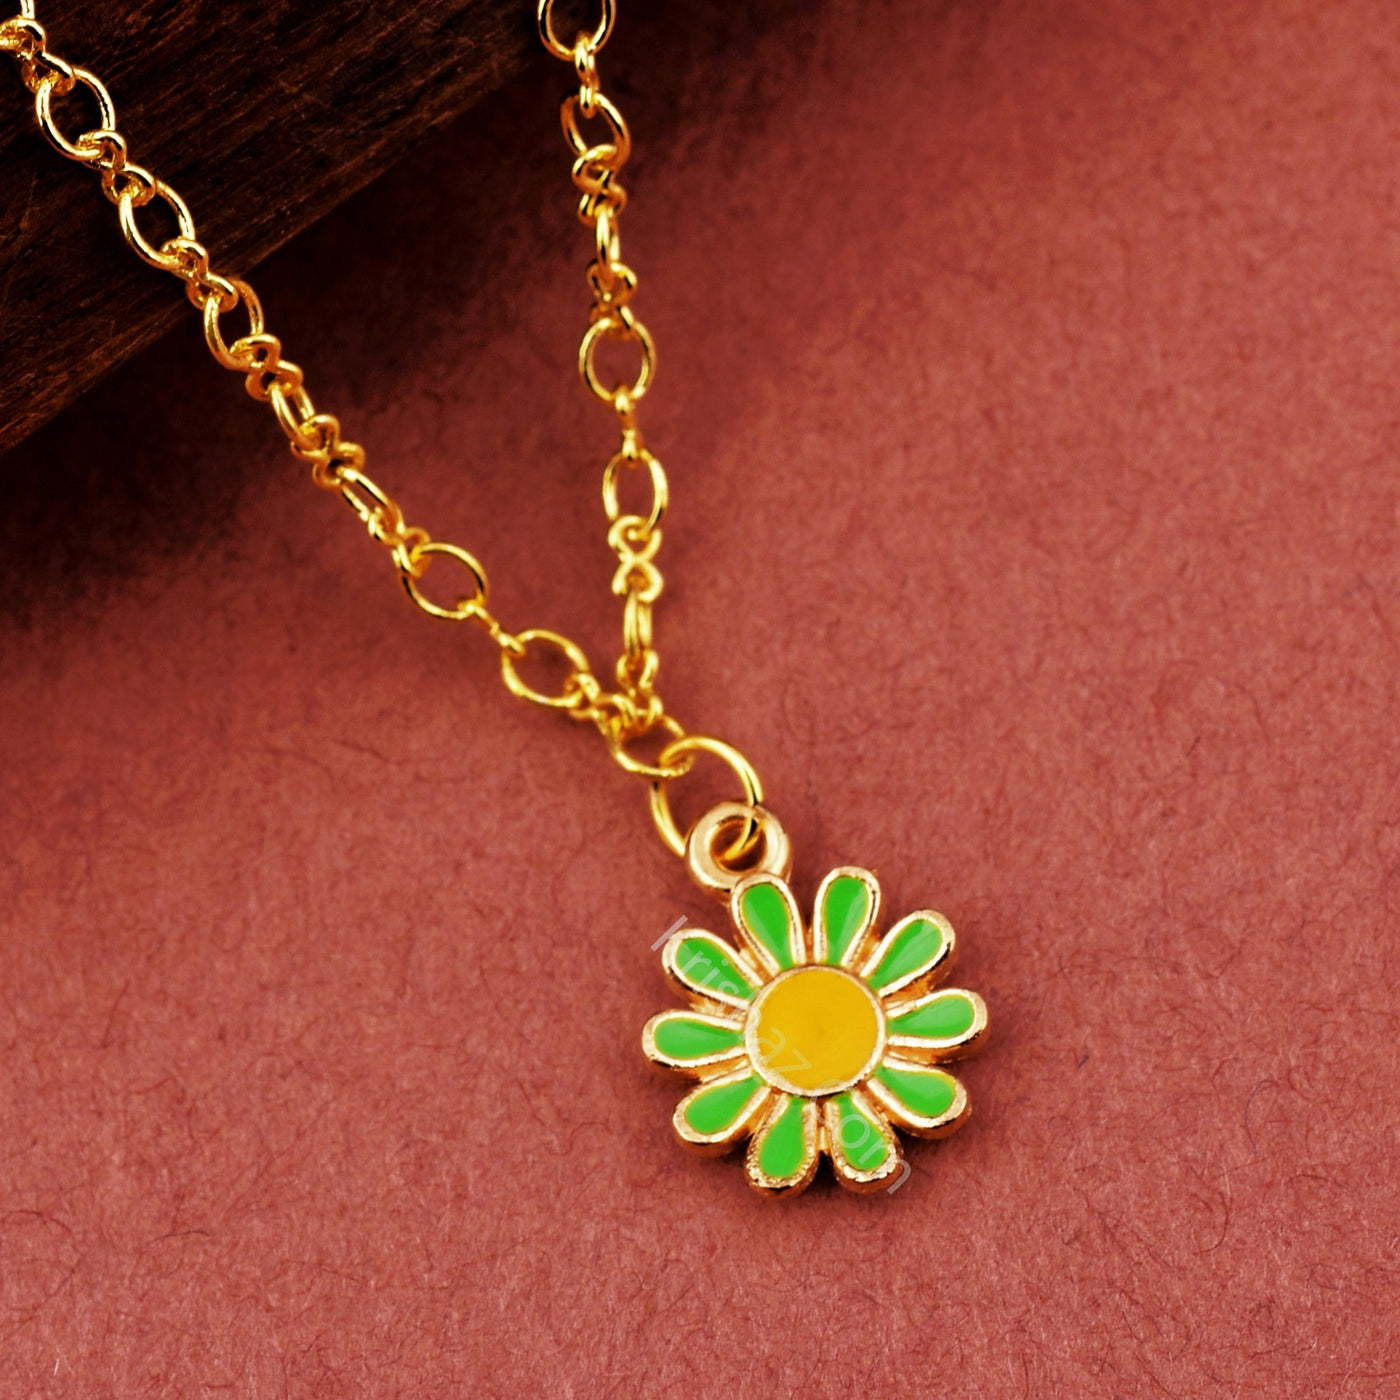 Gold Figure 8 Chain with Flower charms